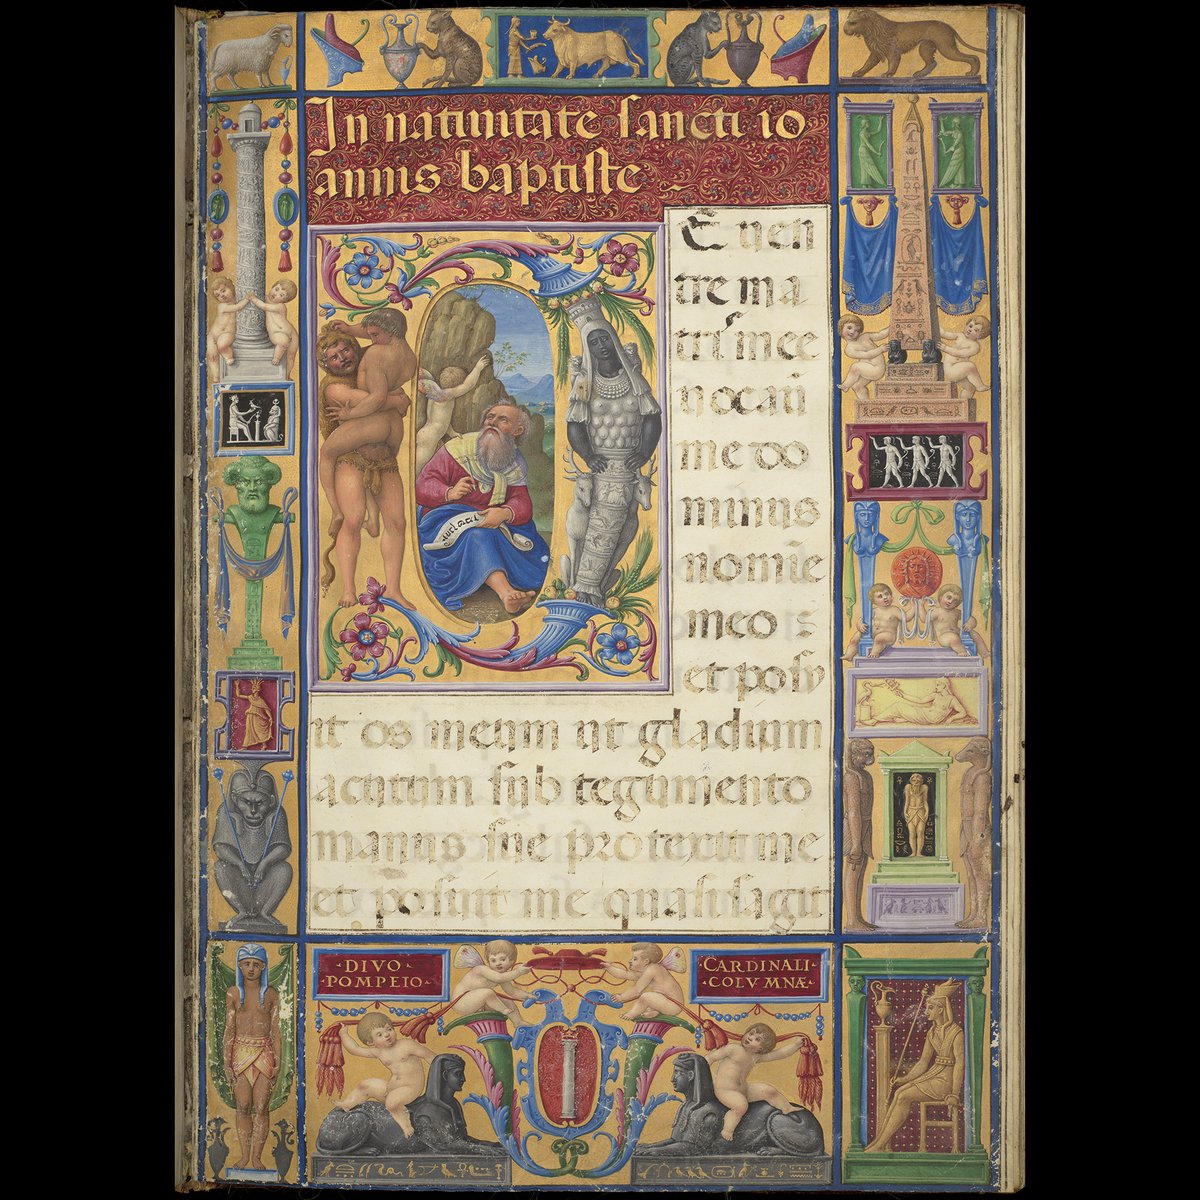 All 7 of our stunning Colonna Missal manuscripts have now been digitised by our photographer Samuel Simpson. They posed extra challenges as they are so highly illuminated and use lots of gold. Take a look here ow.ly/byRS50QUgoa